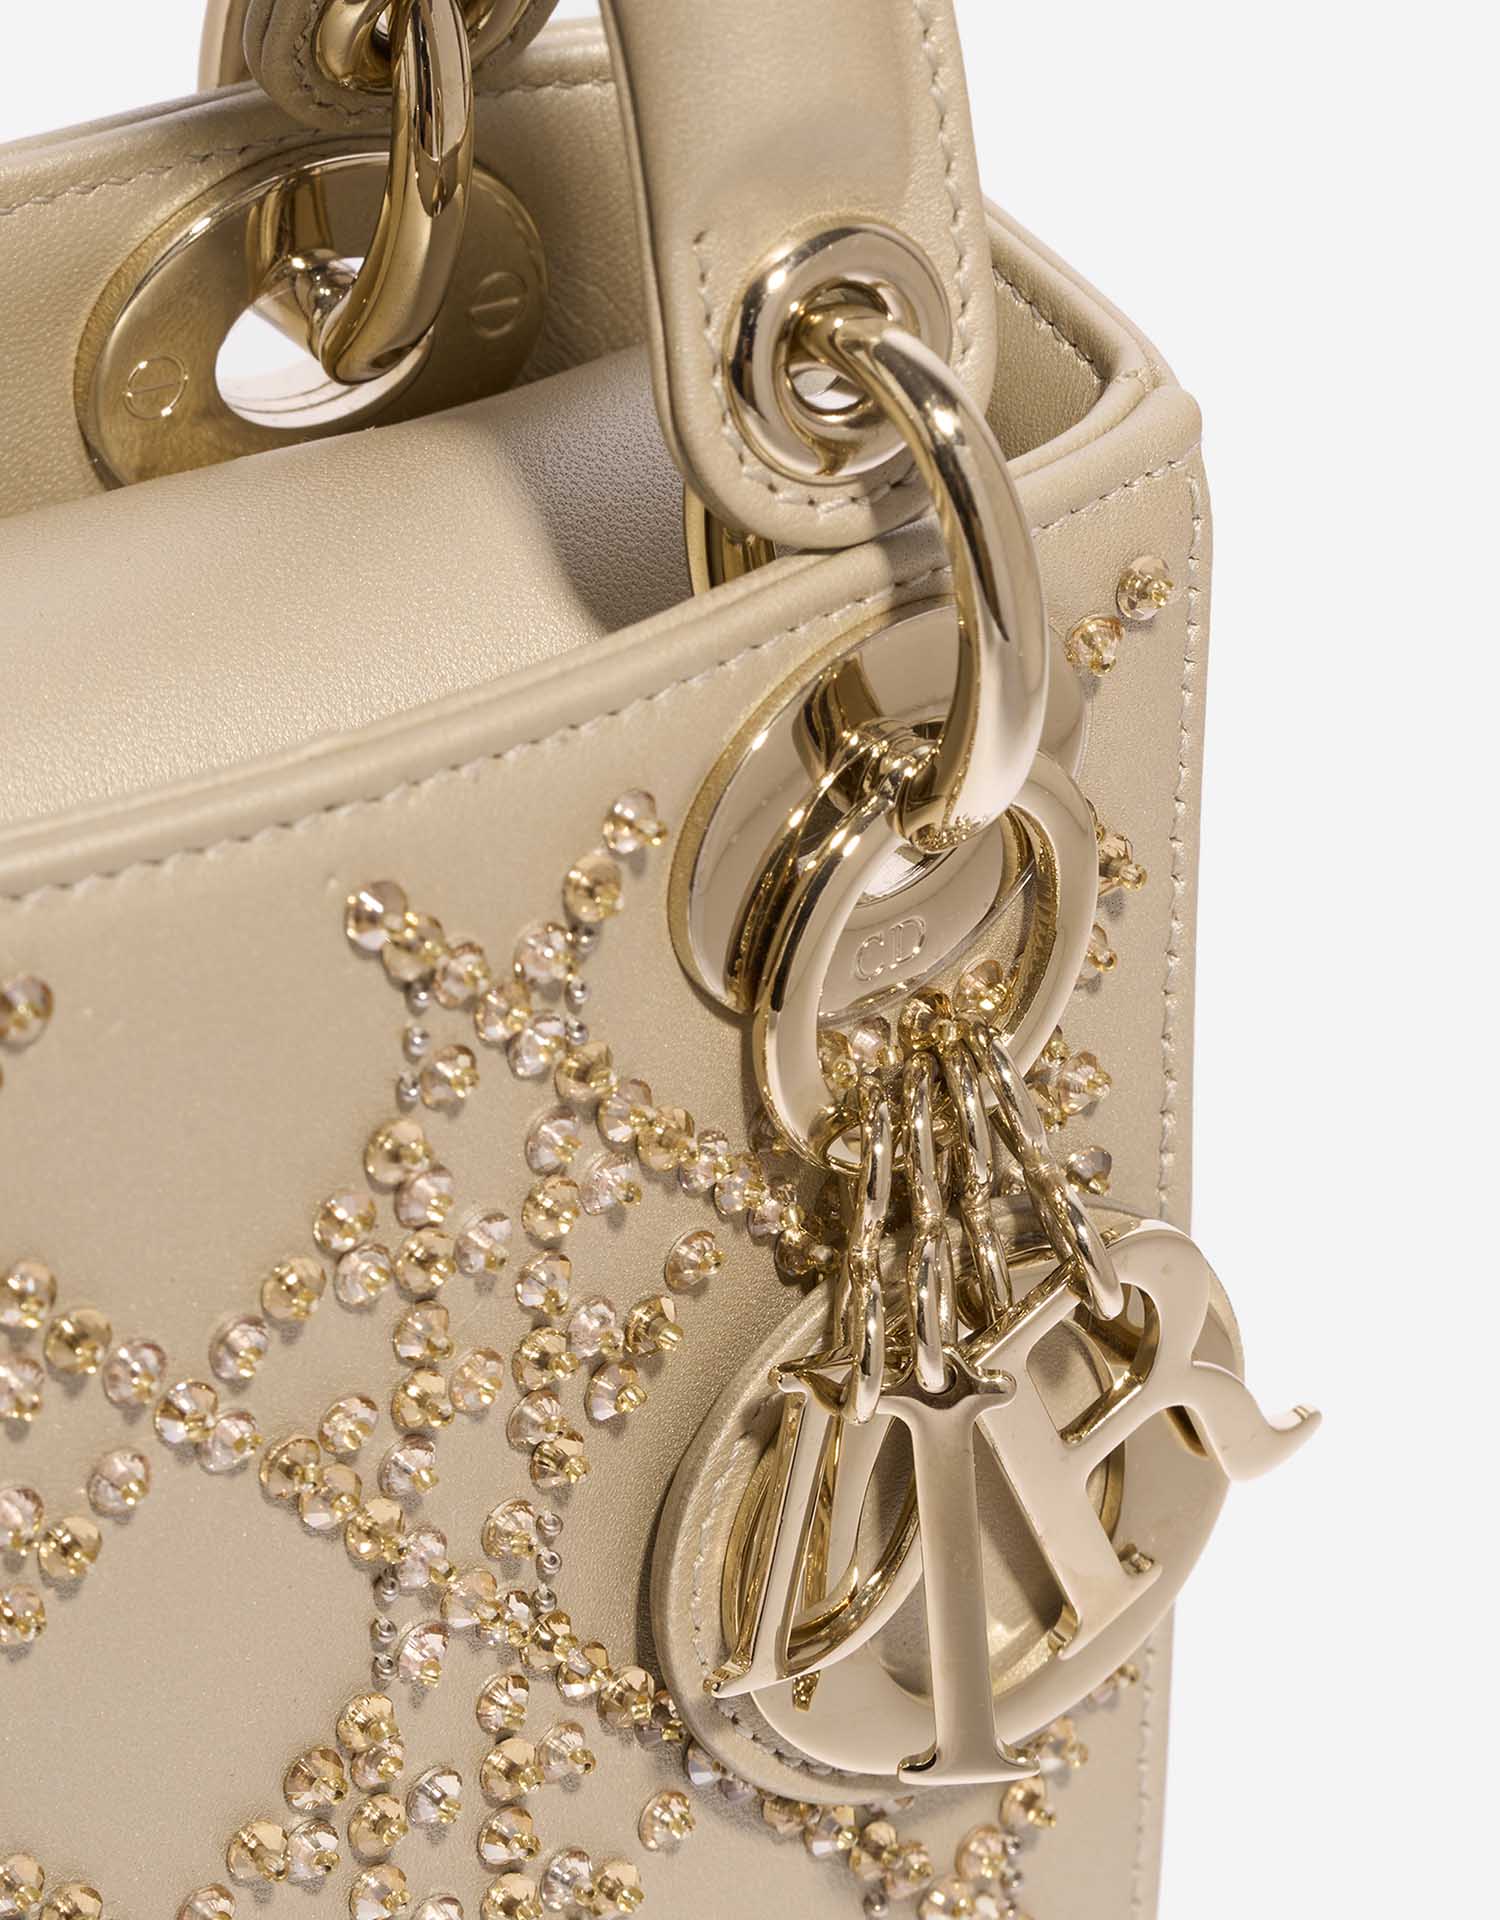 Pre-owned Dior bag Lady Mini Calf Light Beige Beige Closing System | Sell your designer bag on Saclab.com